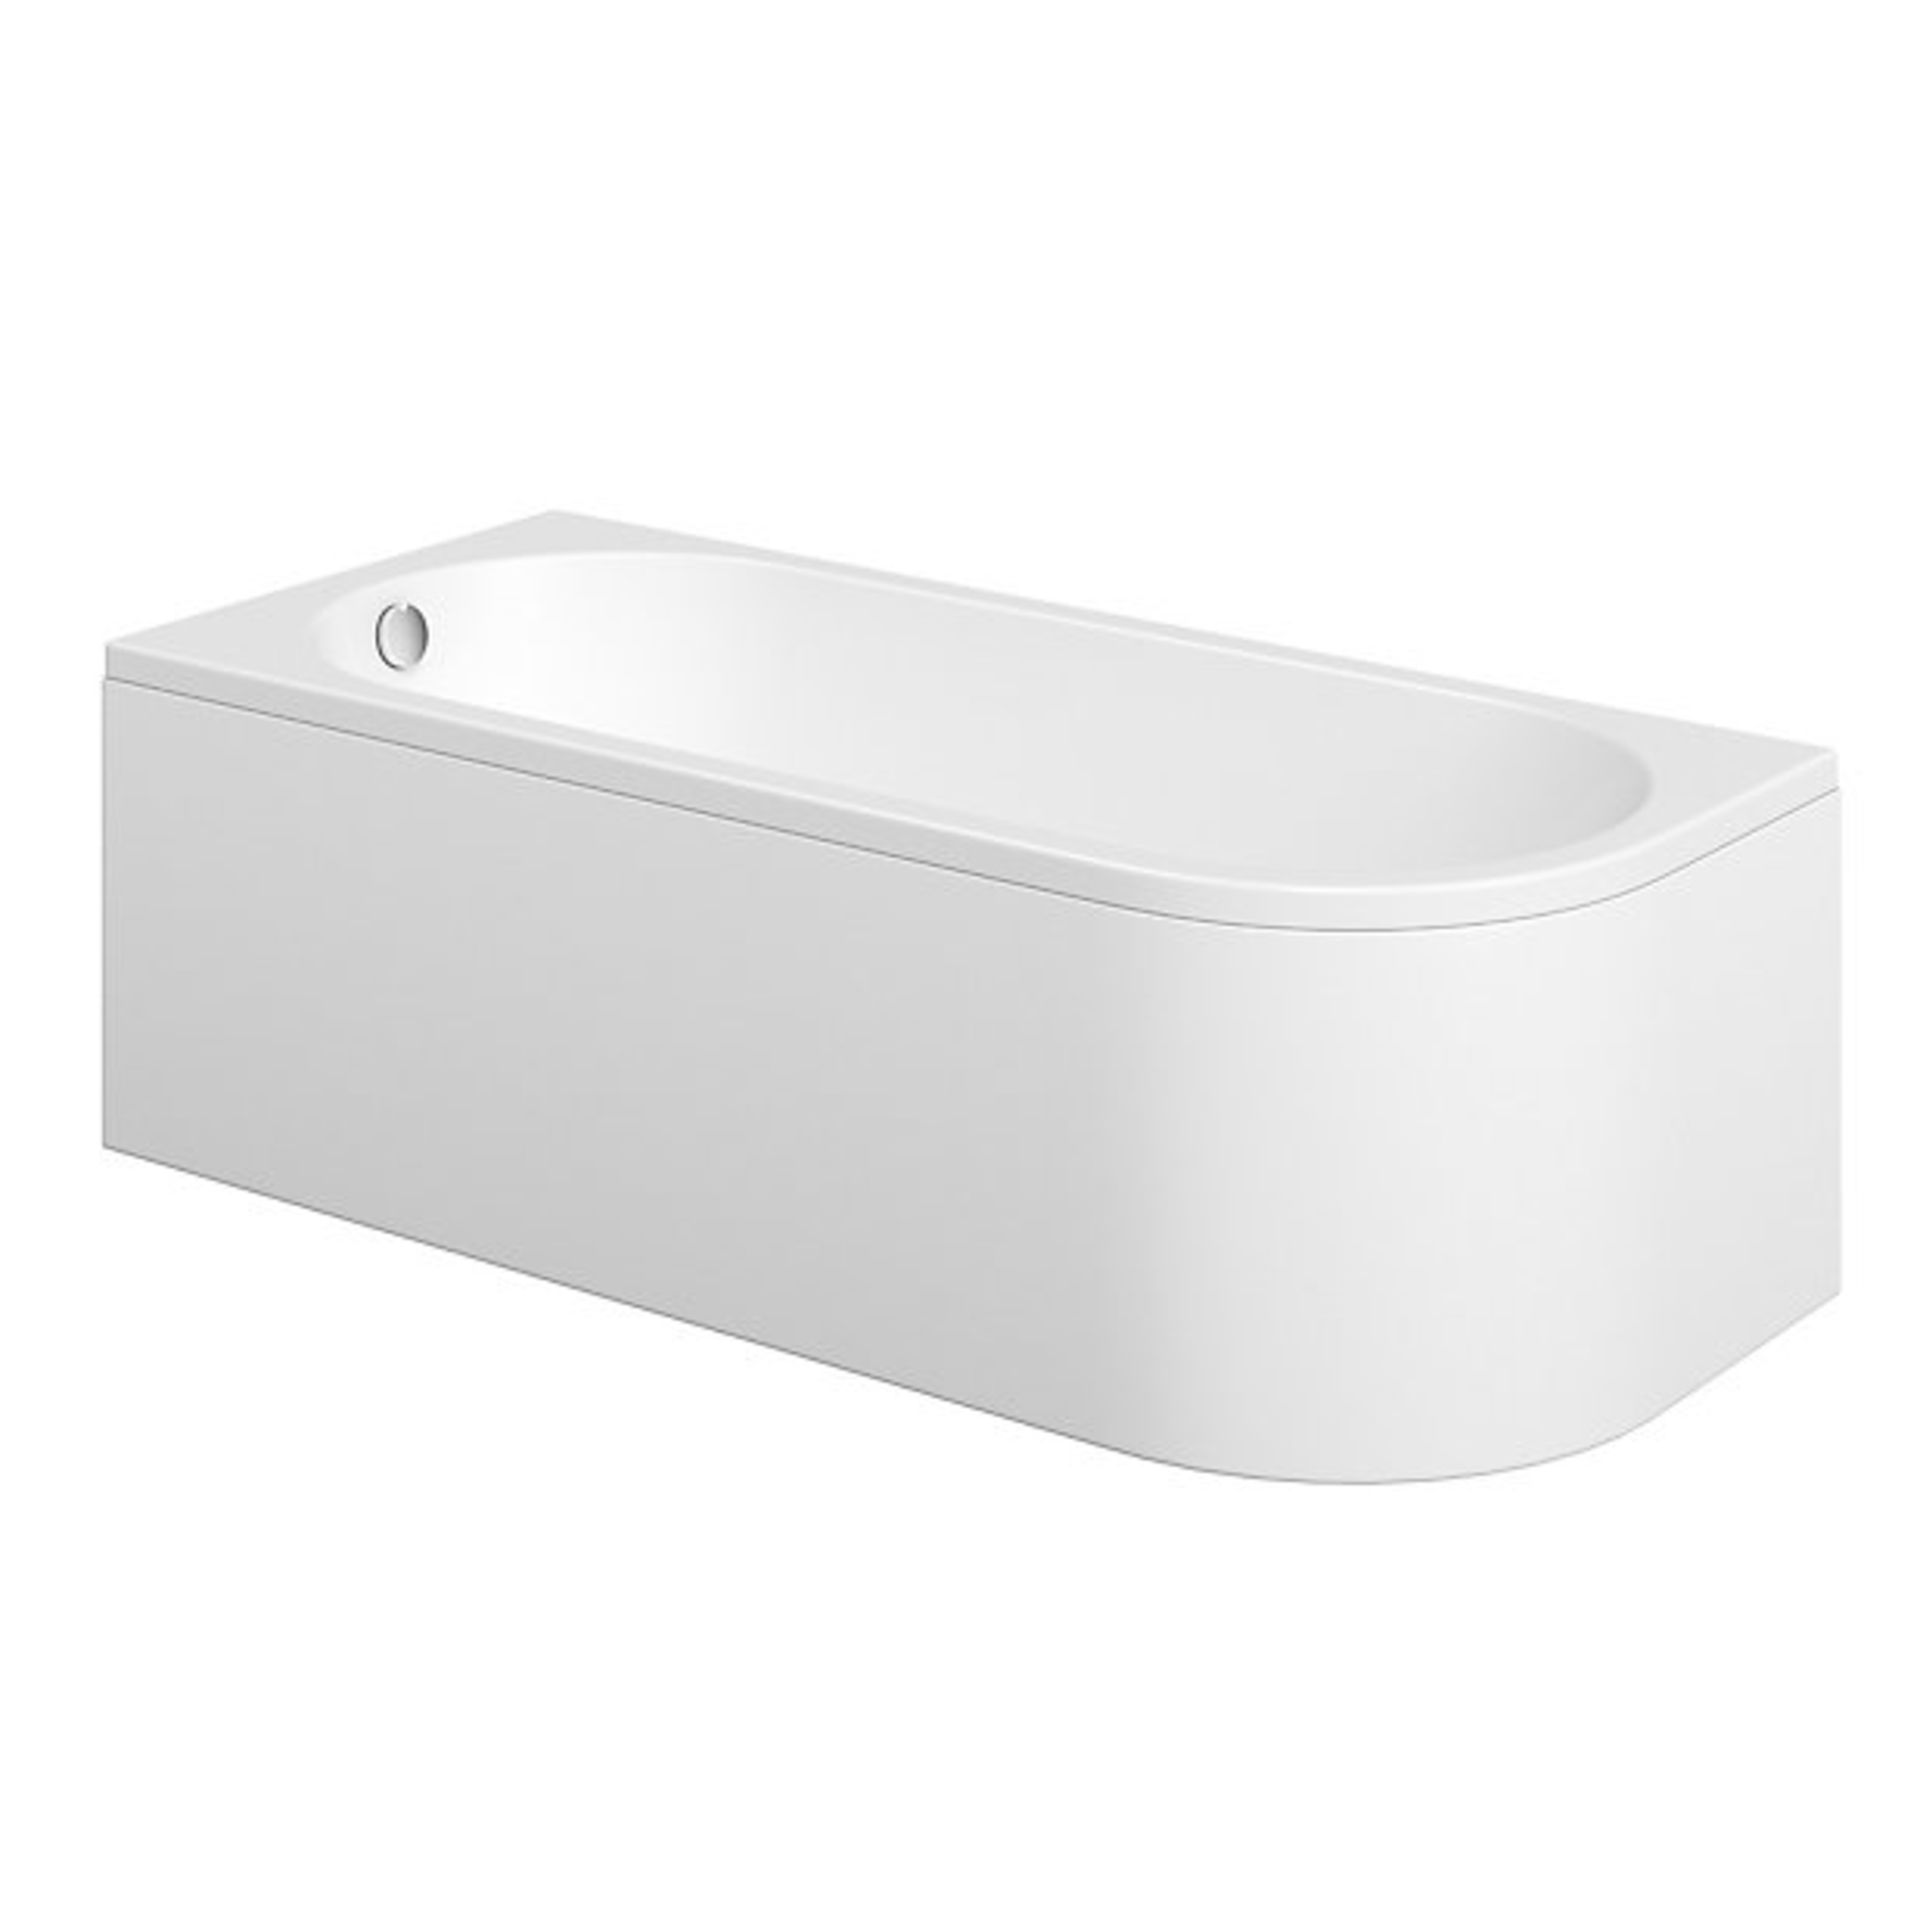 container reference 1000022 rrp £611.38